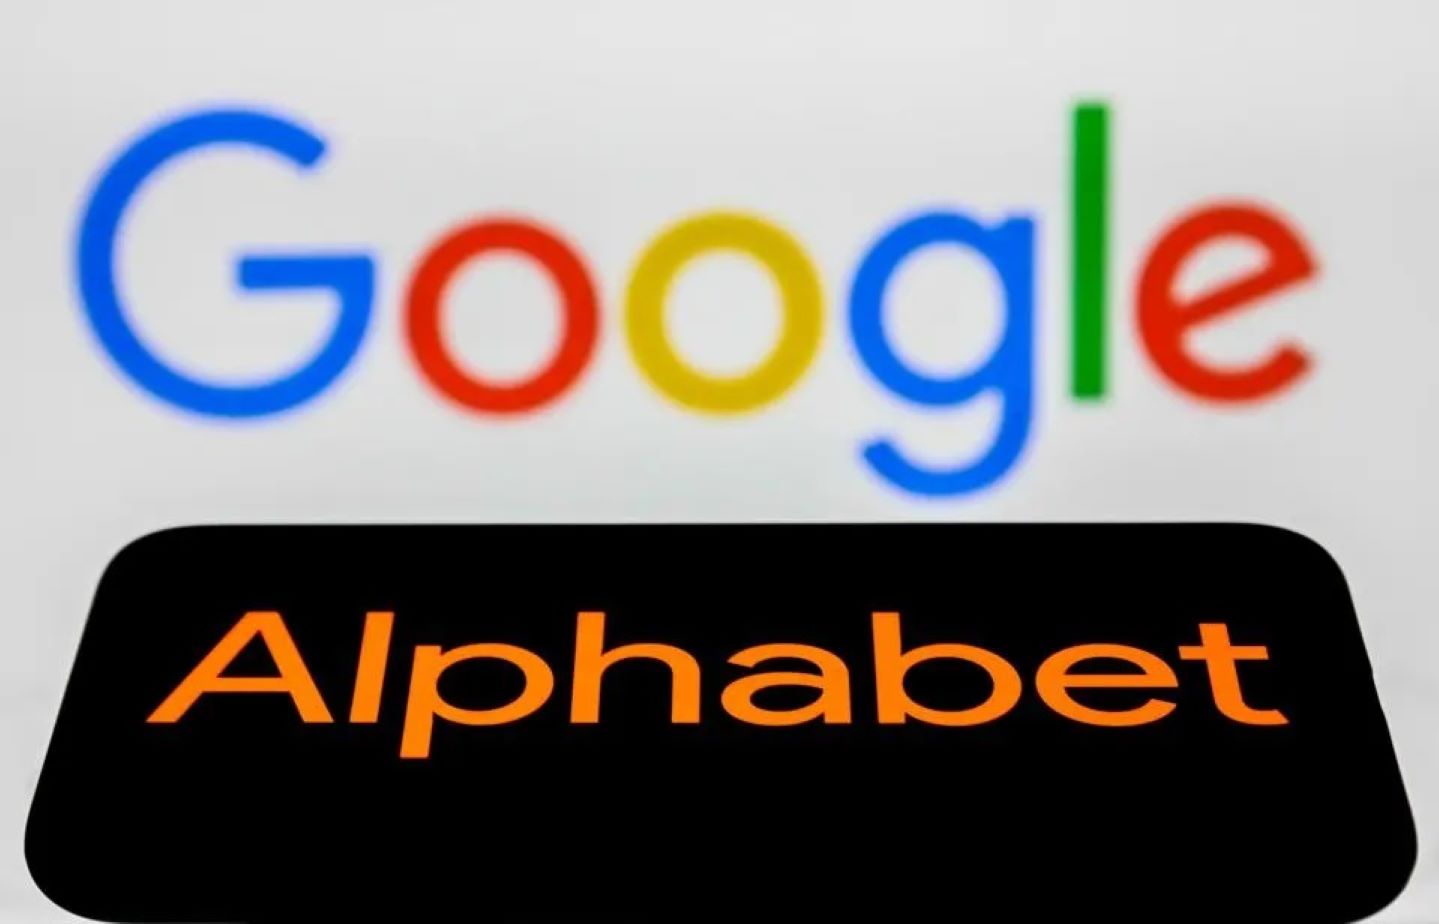 Alphabet Reaches the Market Cap of $2 Trillion Exceeding Projections